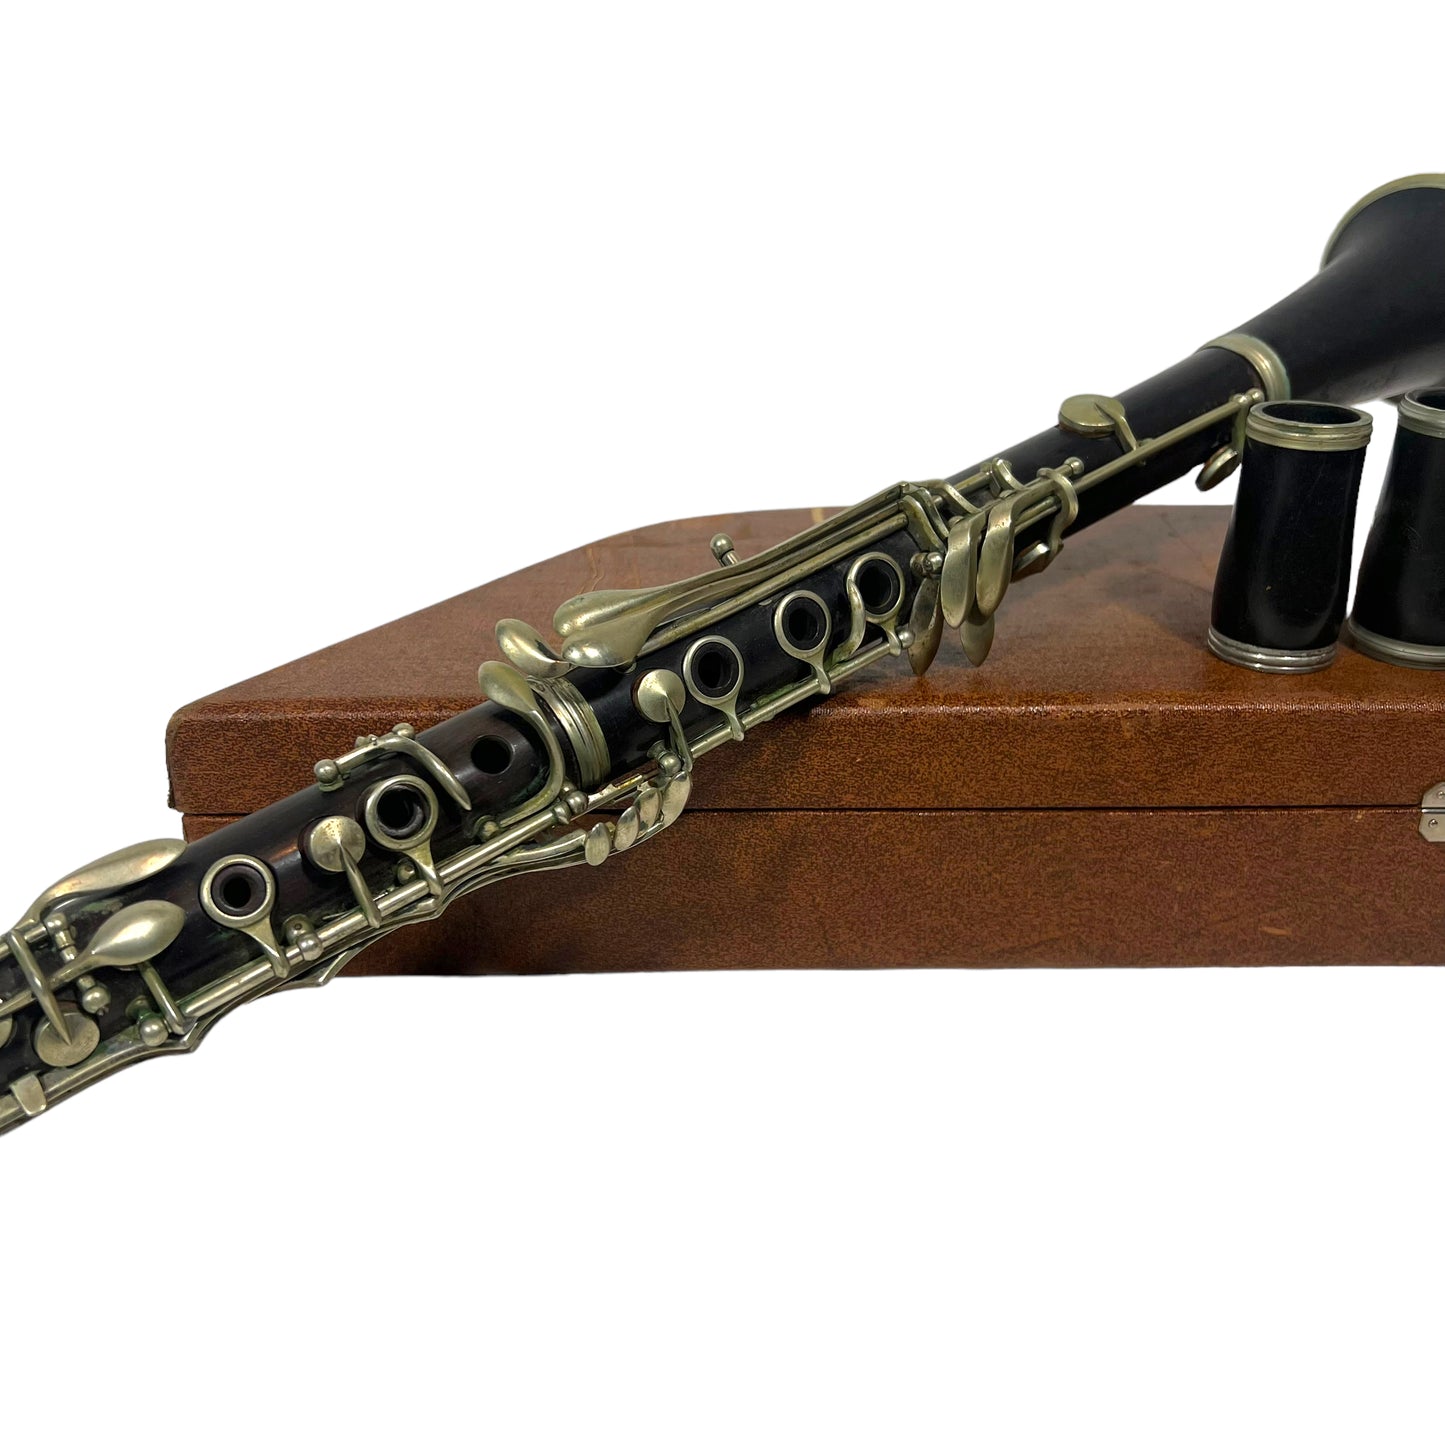 Aguste Crampon 1900-1925 Antique Clarinet Silver Plate Woodwind Instrument